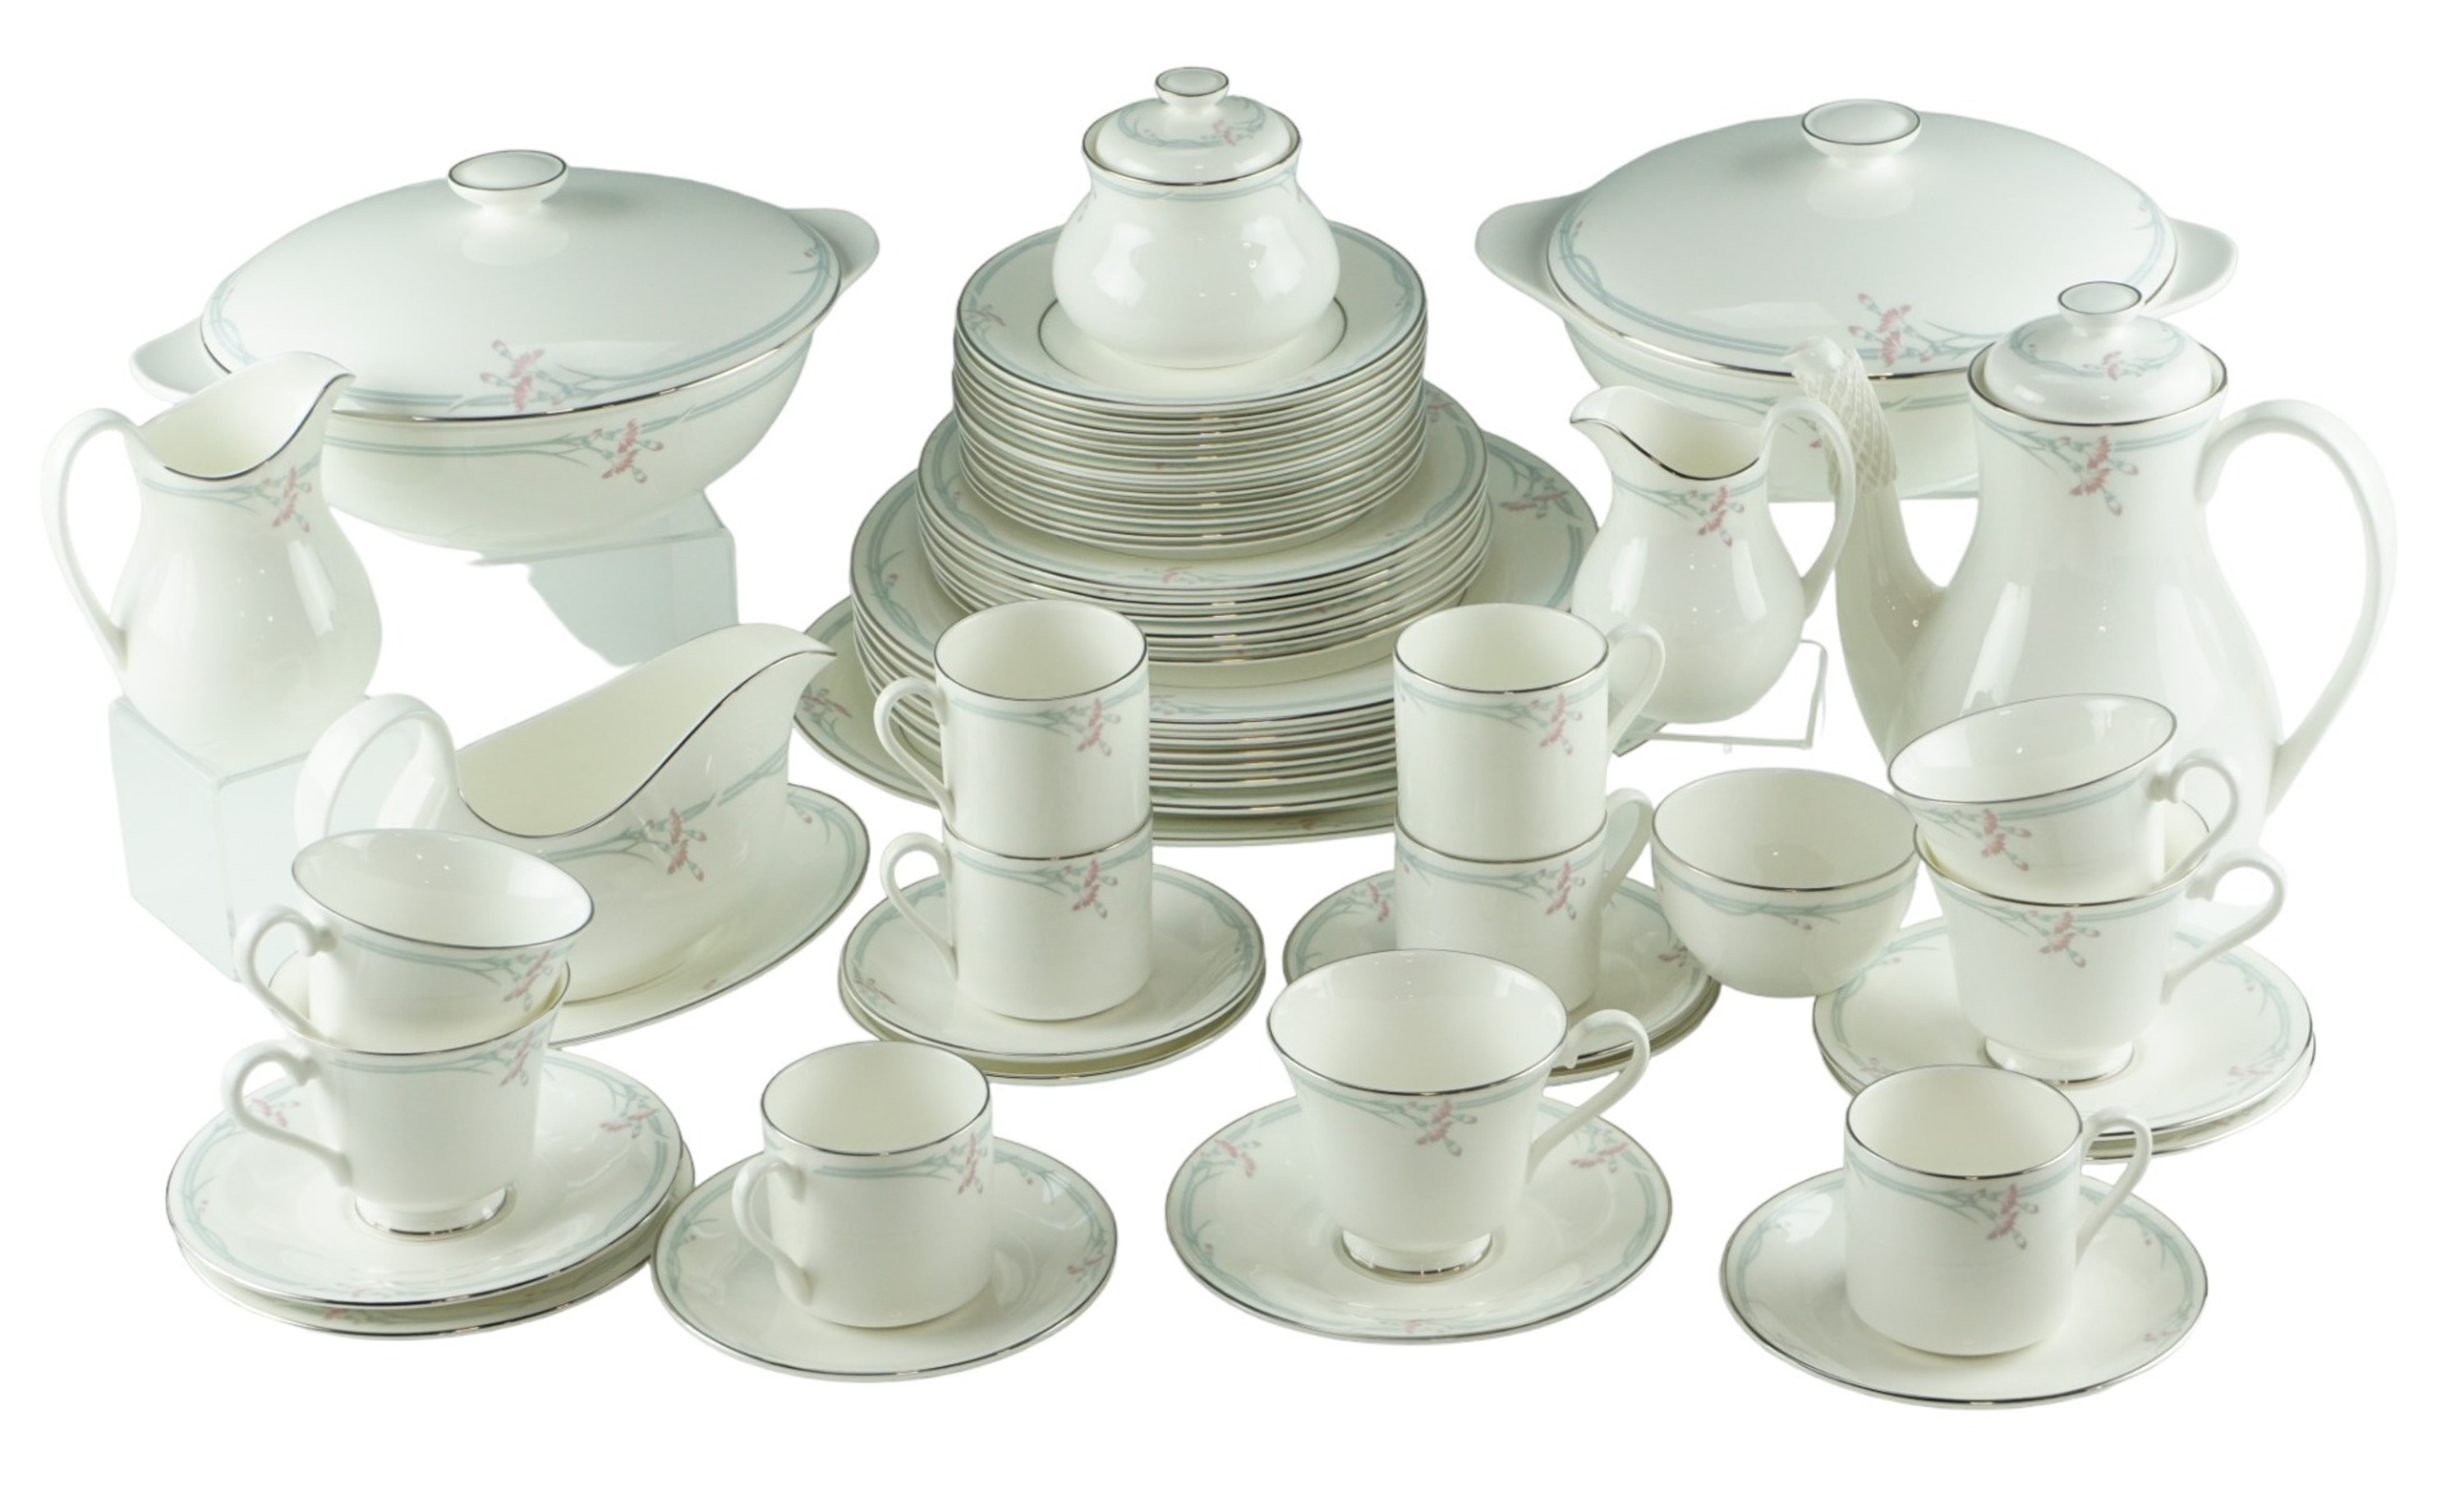 An extensive Royal Doulton Carnation tea and dinner service, over 50 items